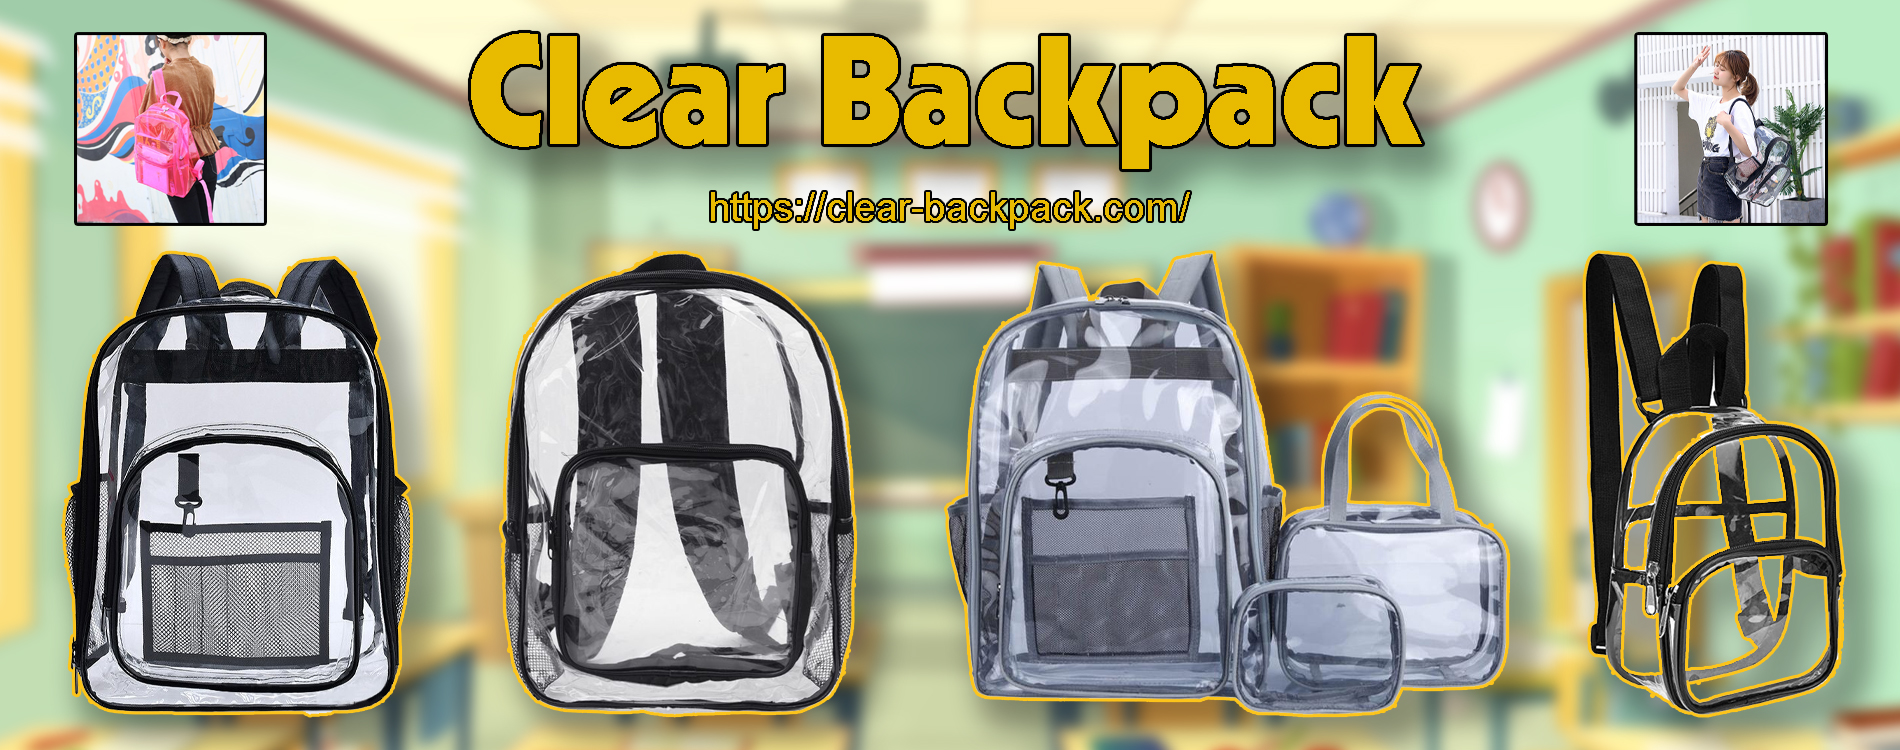 clear-backpack-banner